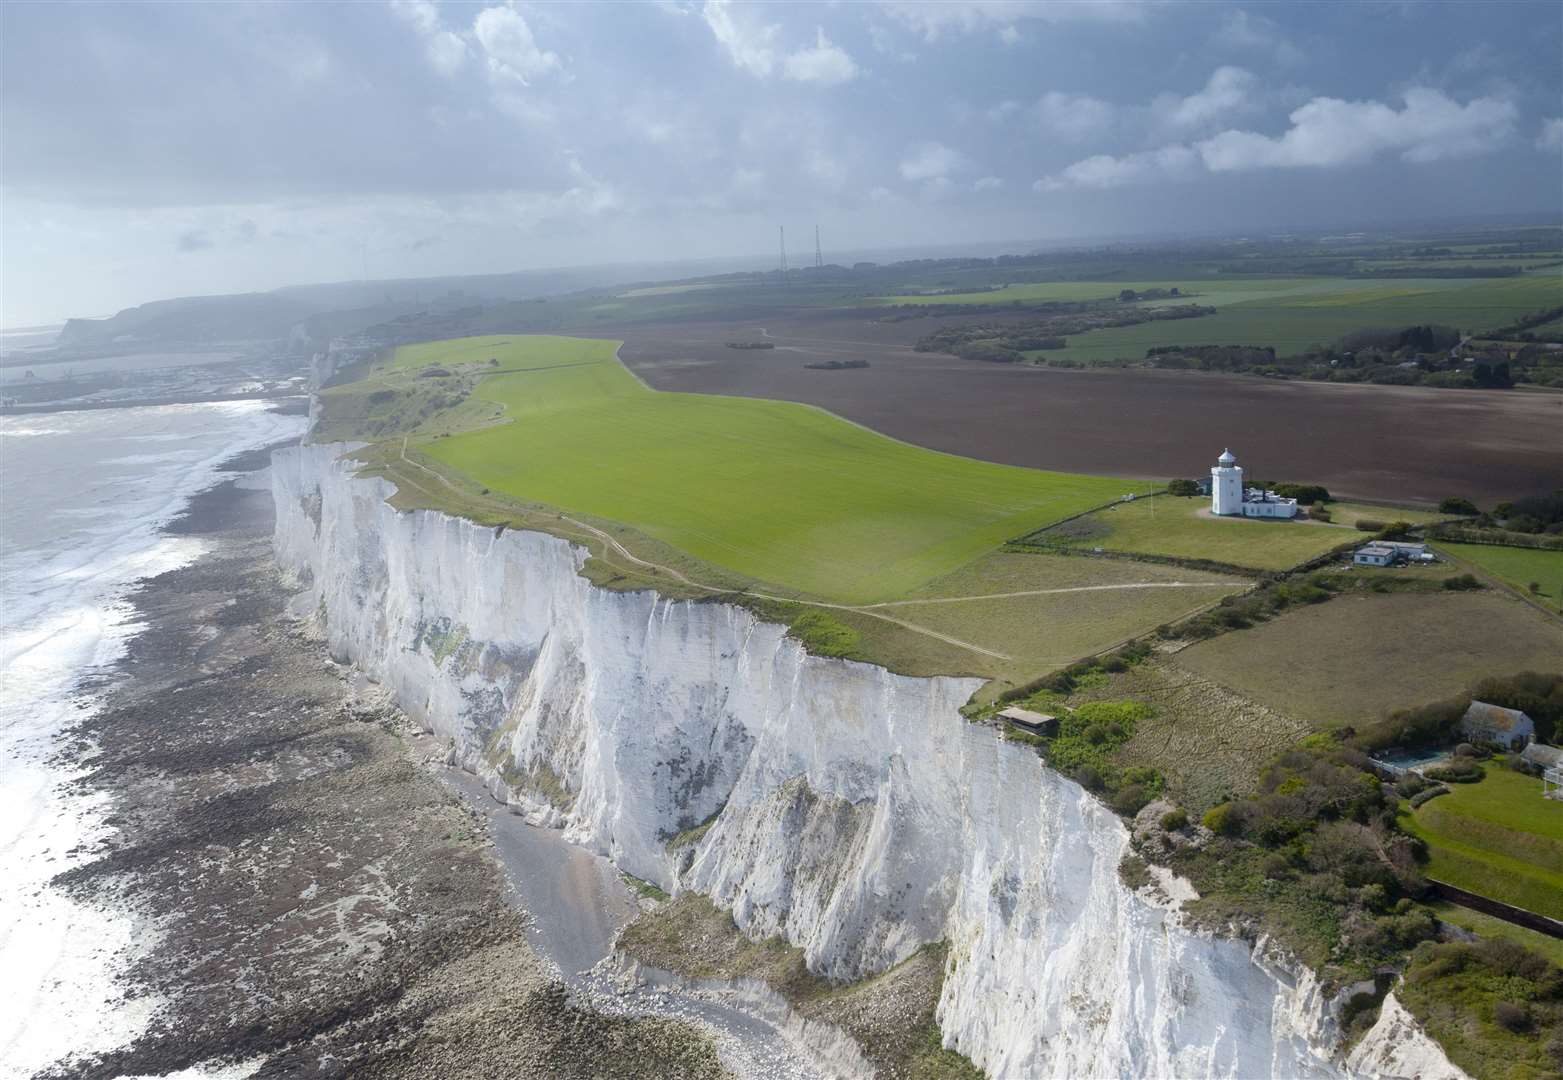 The planes will fly above the White Cliffs of Dover